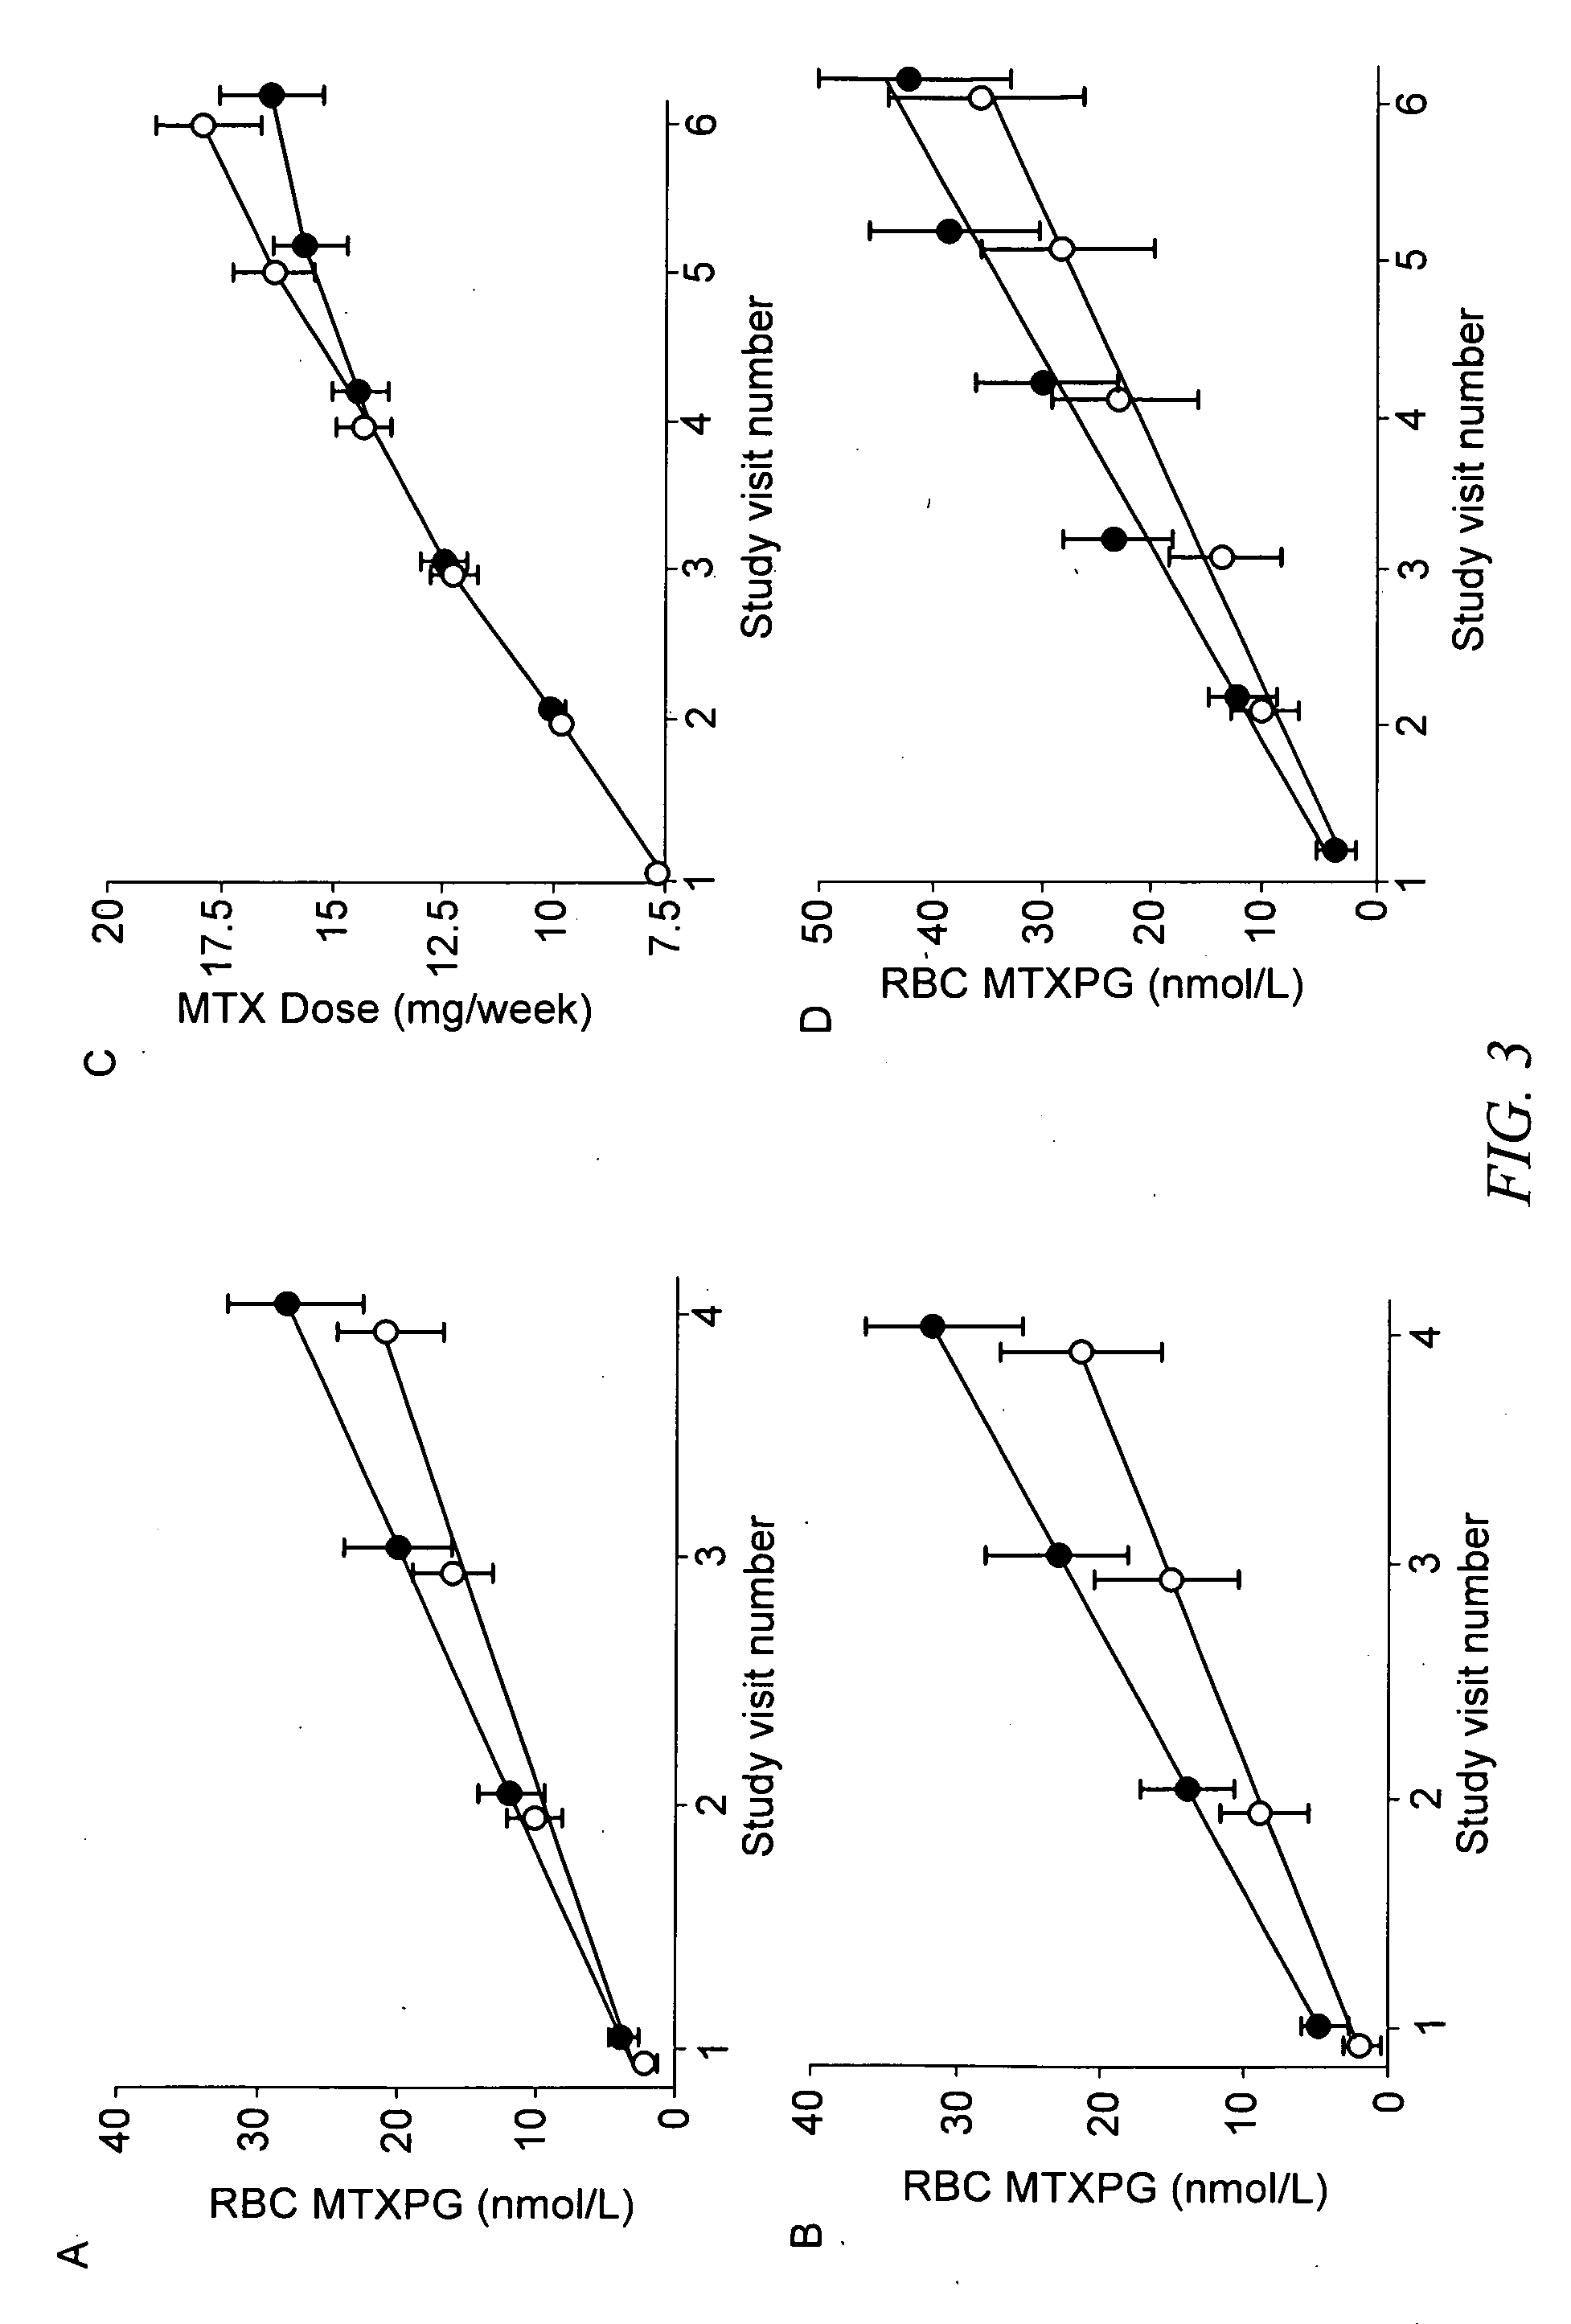 Methods of predicting methotrexate efficacy and toxicity